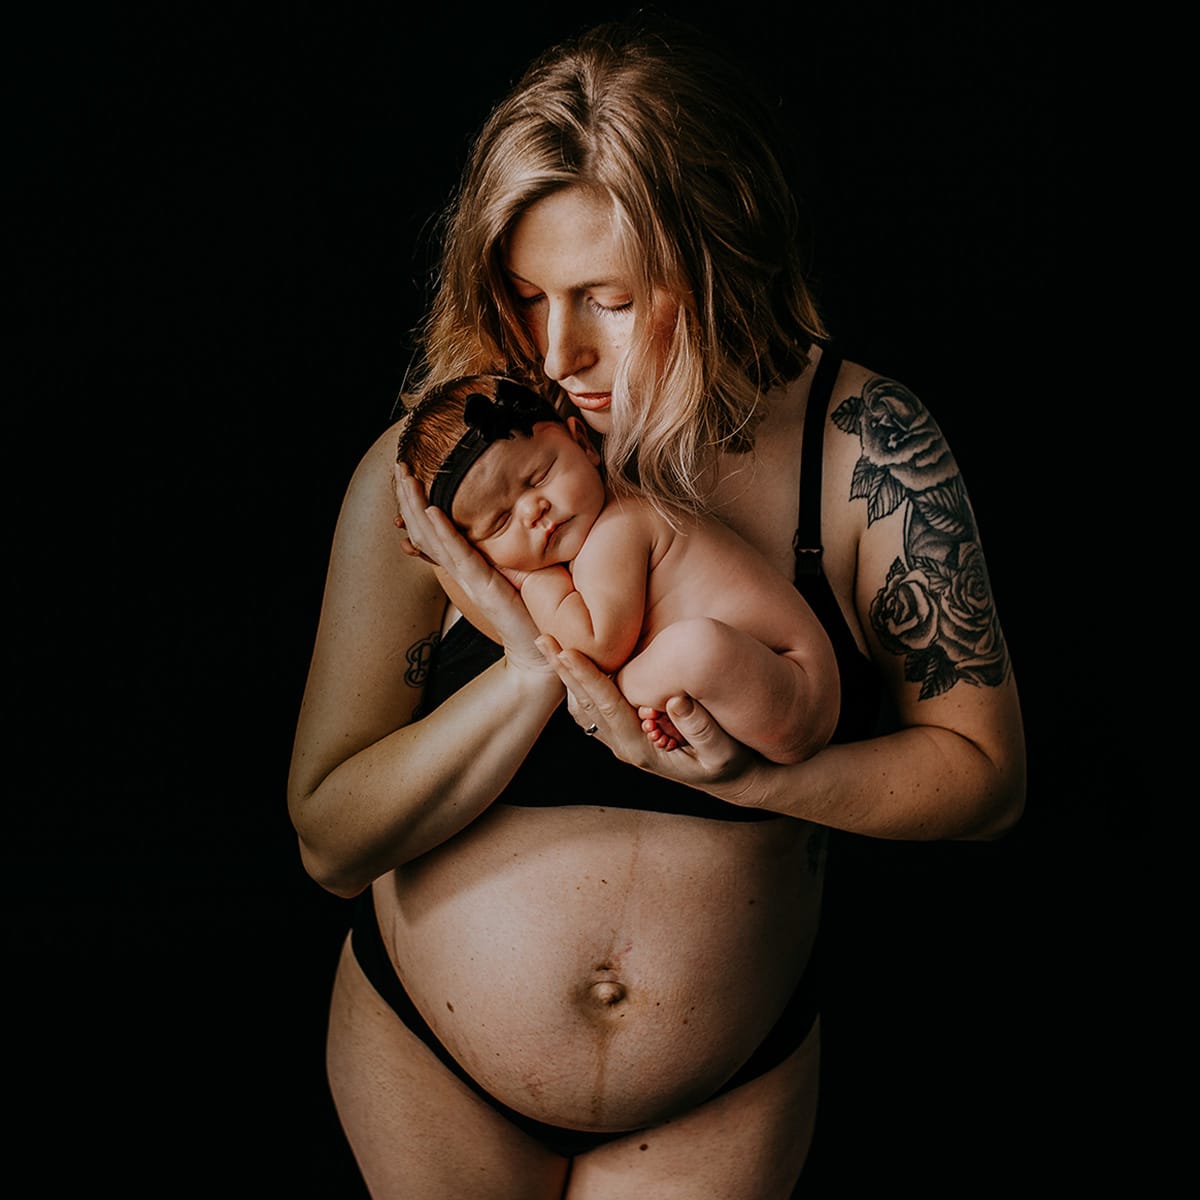 My Real Postpartum Body: I Want Every Mom To Know That It's Normal